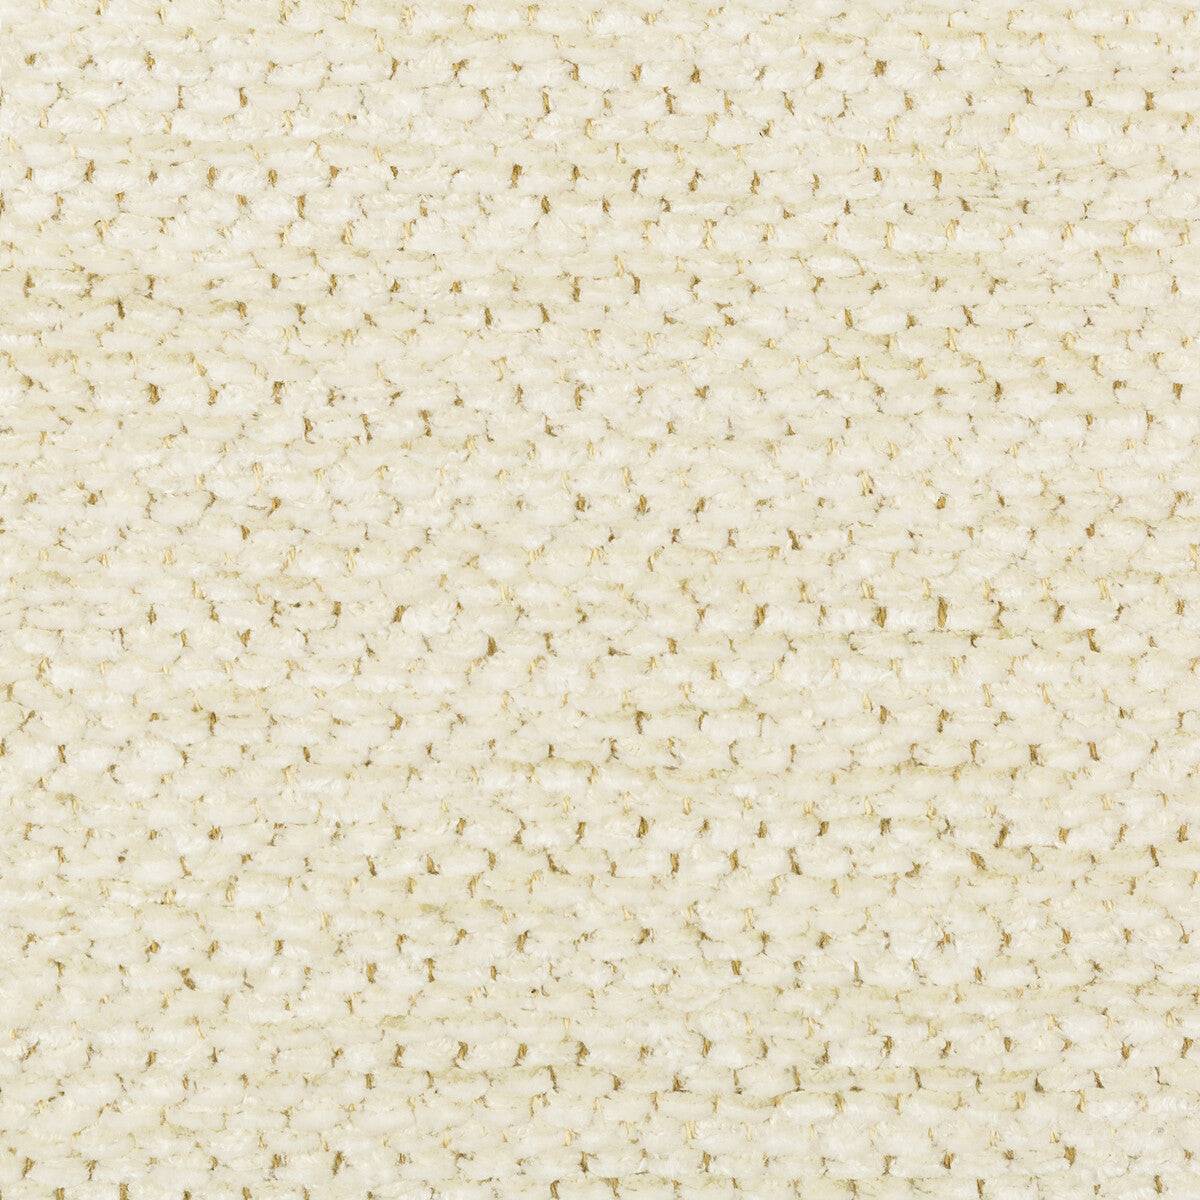 Chamoux Texture fabric in cream color - pattern 8019145.1.0 - by Brunschwig &amp; Fils in the Chambery Textures II collection